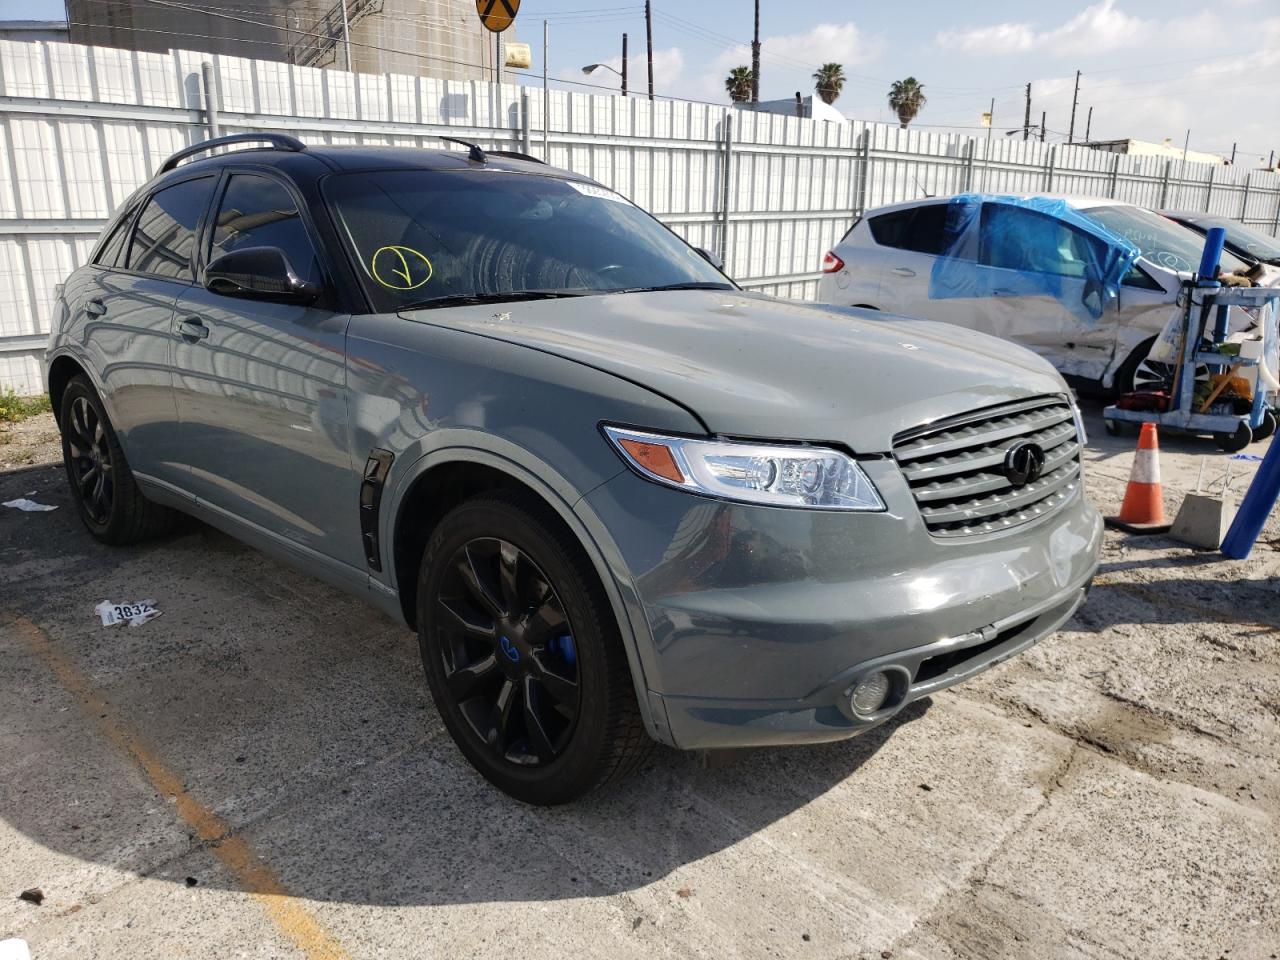 2005 Infiniti FX35 for sale at Copart Wilmington, CA Lot #38252*** |  SalvageReseller.com